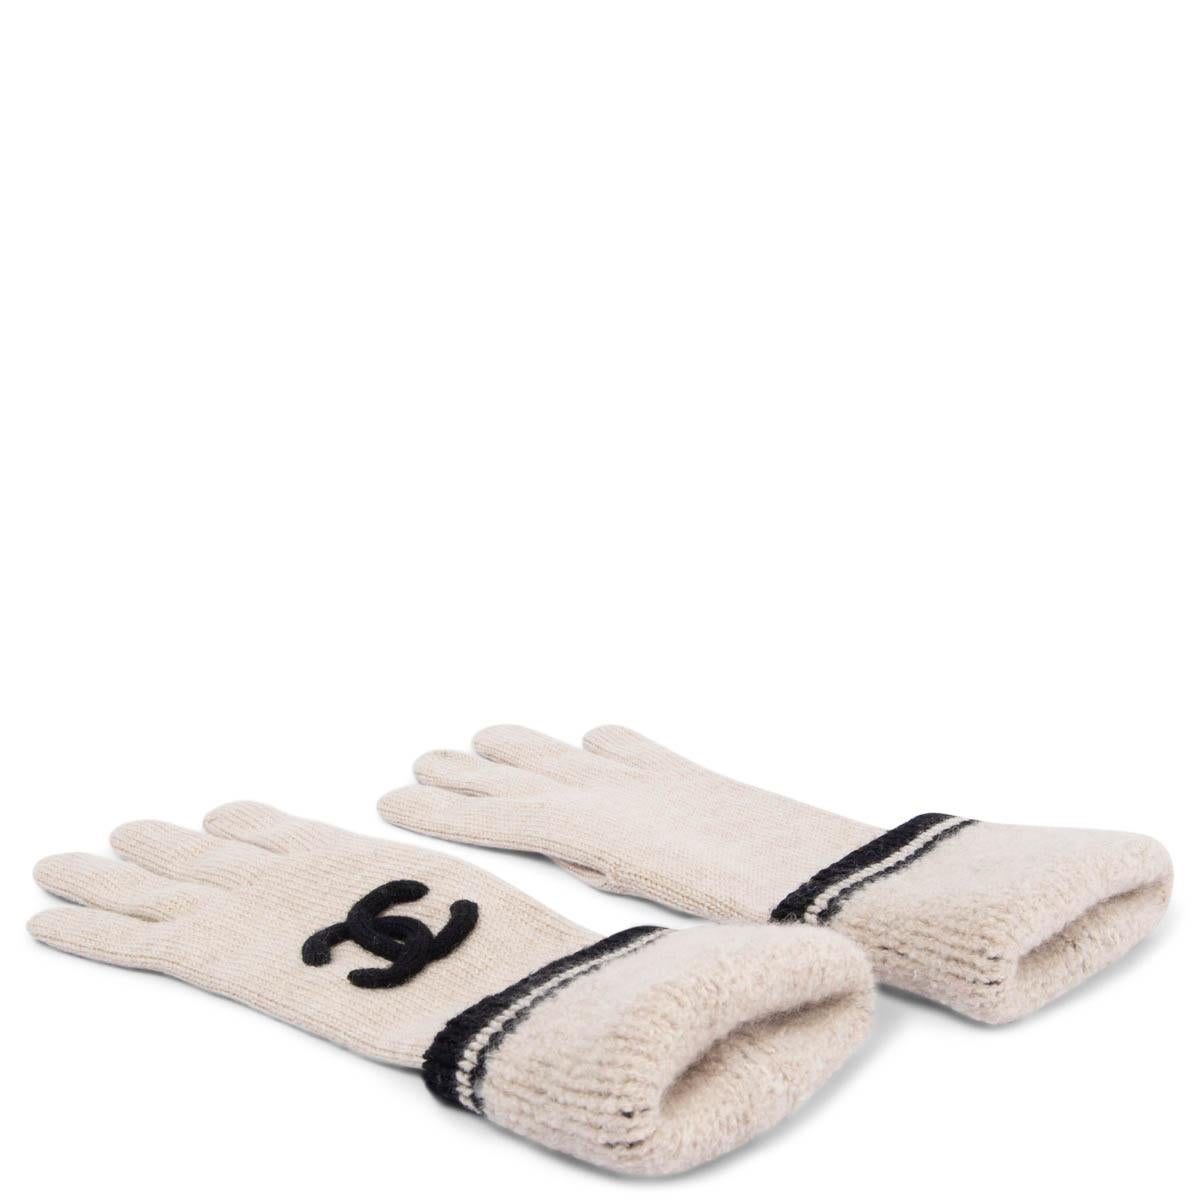 100% authentic Chanel 2021 CC knit gloves in sand and black wool (49%), cashmere (39%) and silk (12%). Have been worn once and are in virtually new condition. Come with matching beanie and shawl in separate listing.